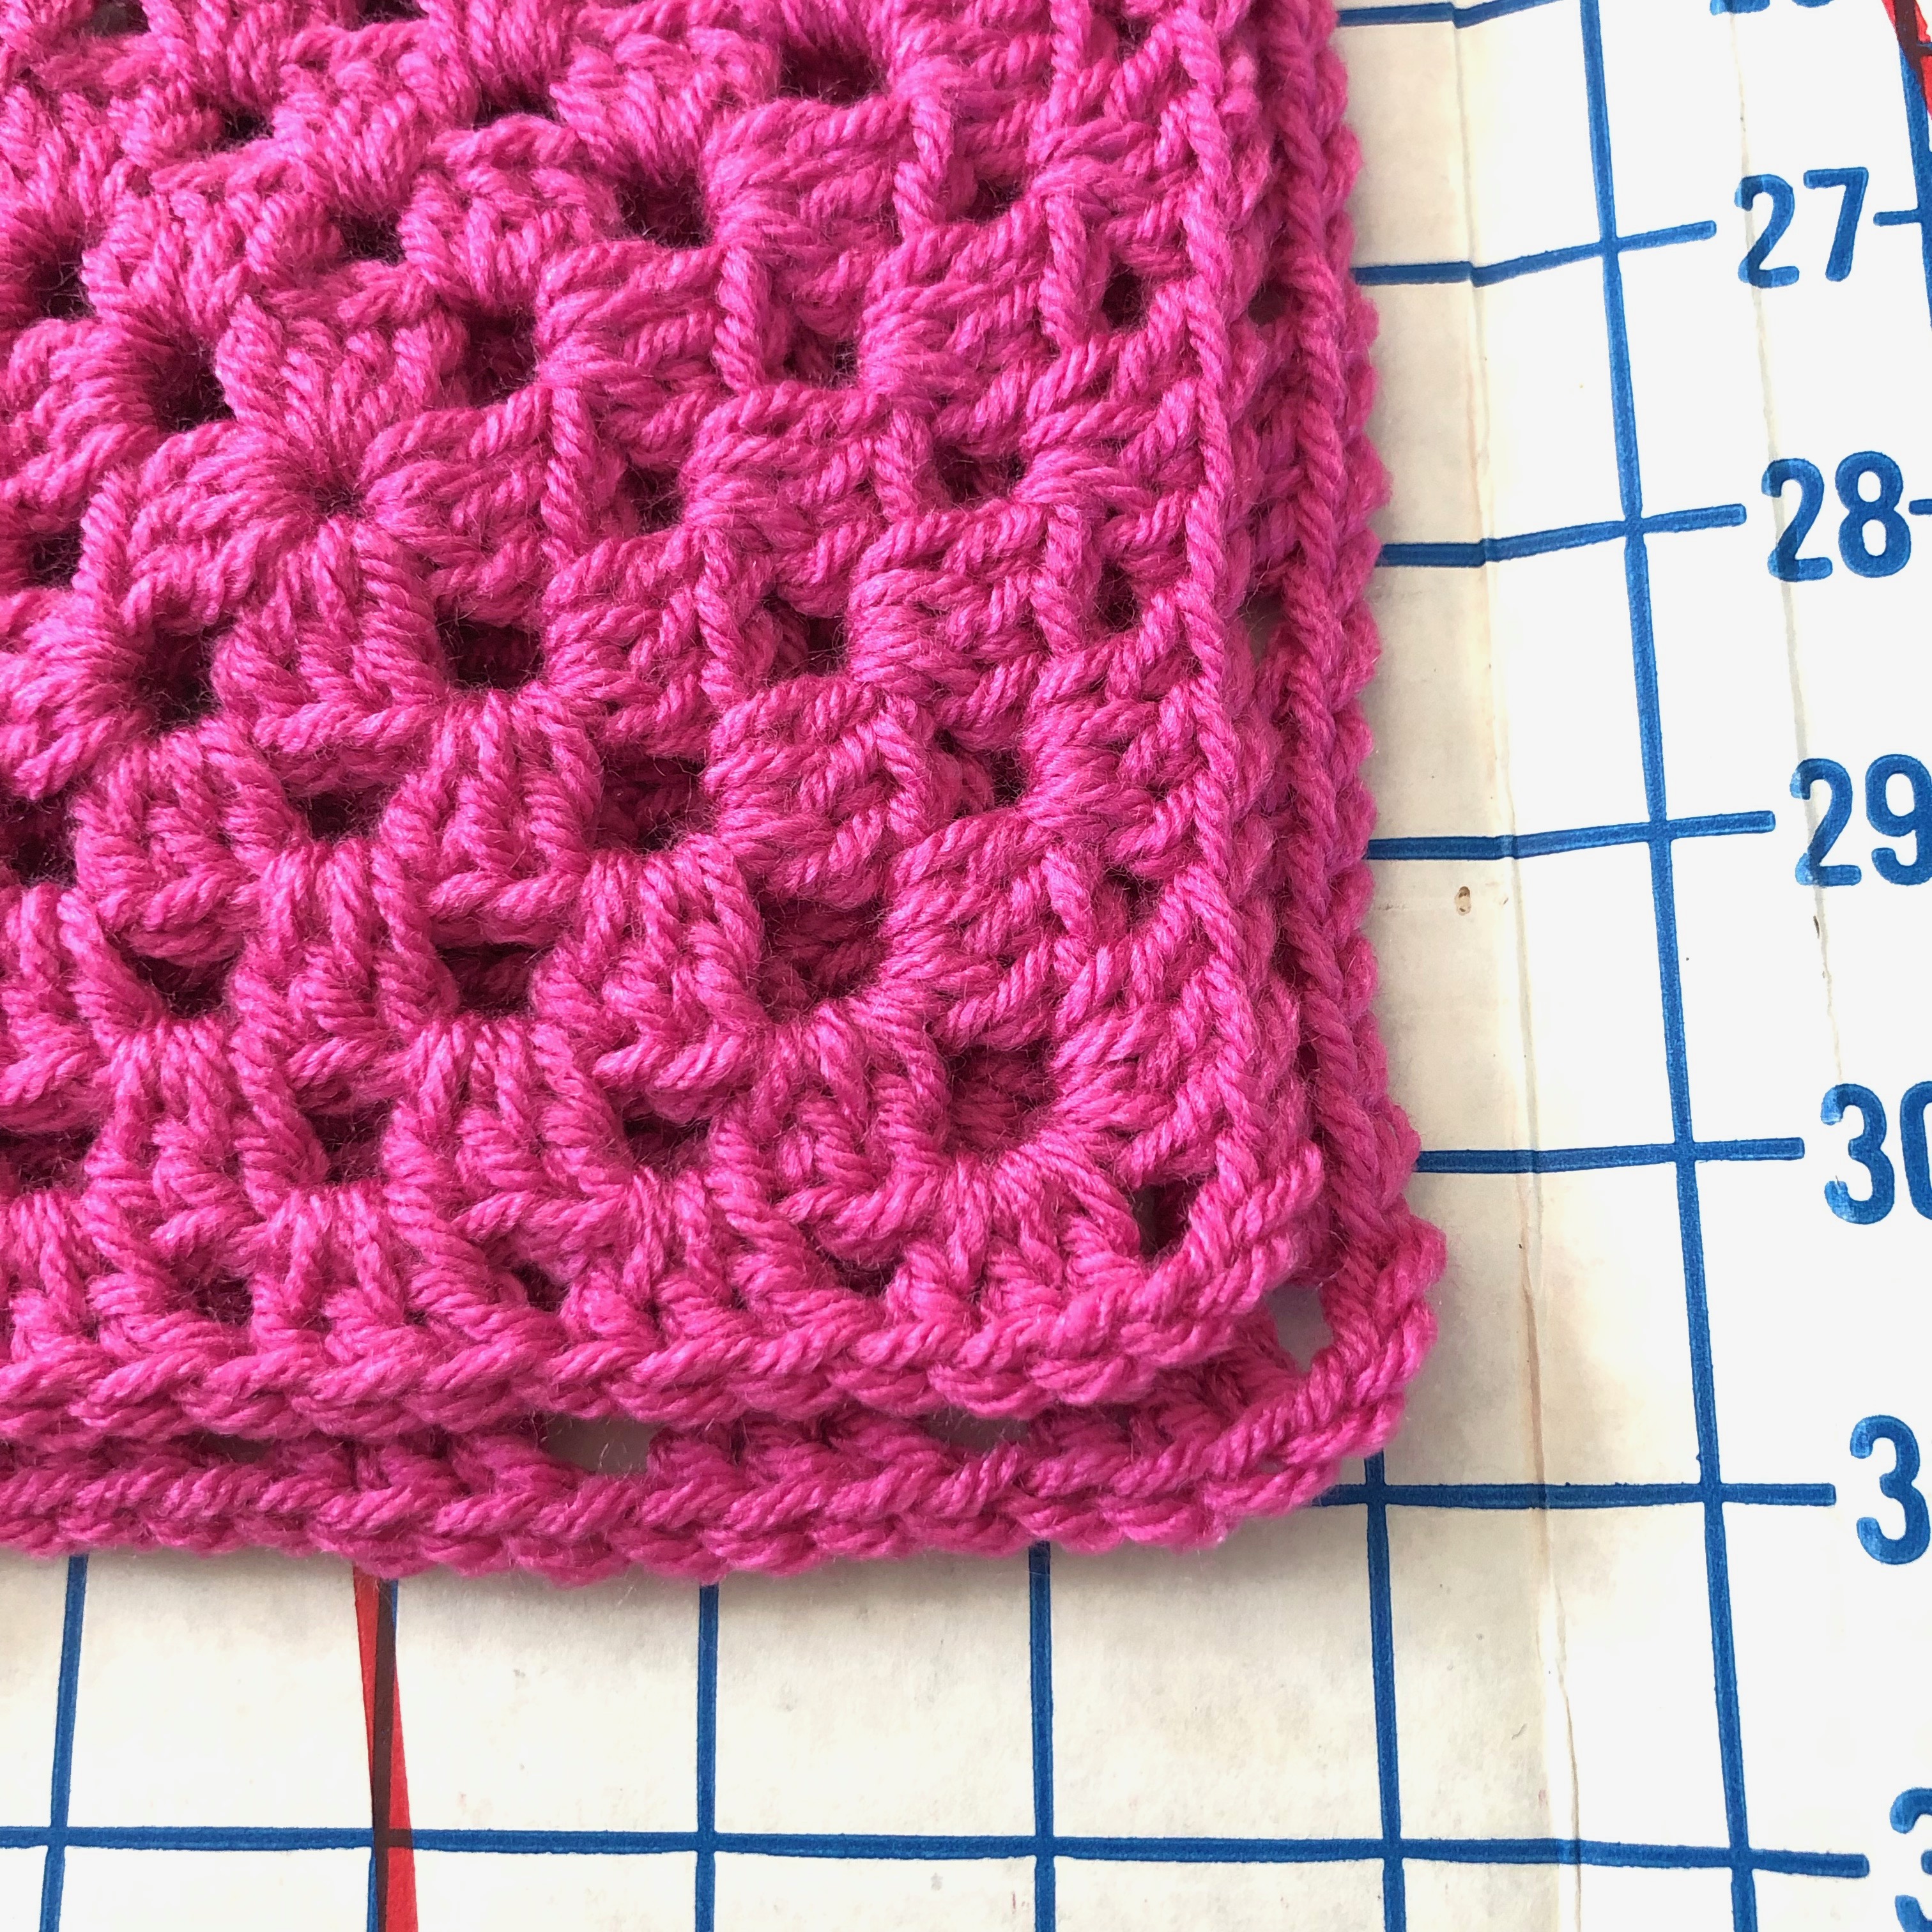 Keeping Granny Squares Straight